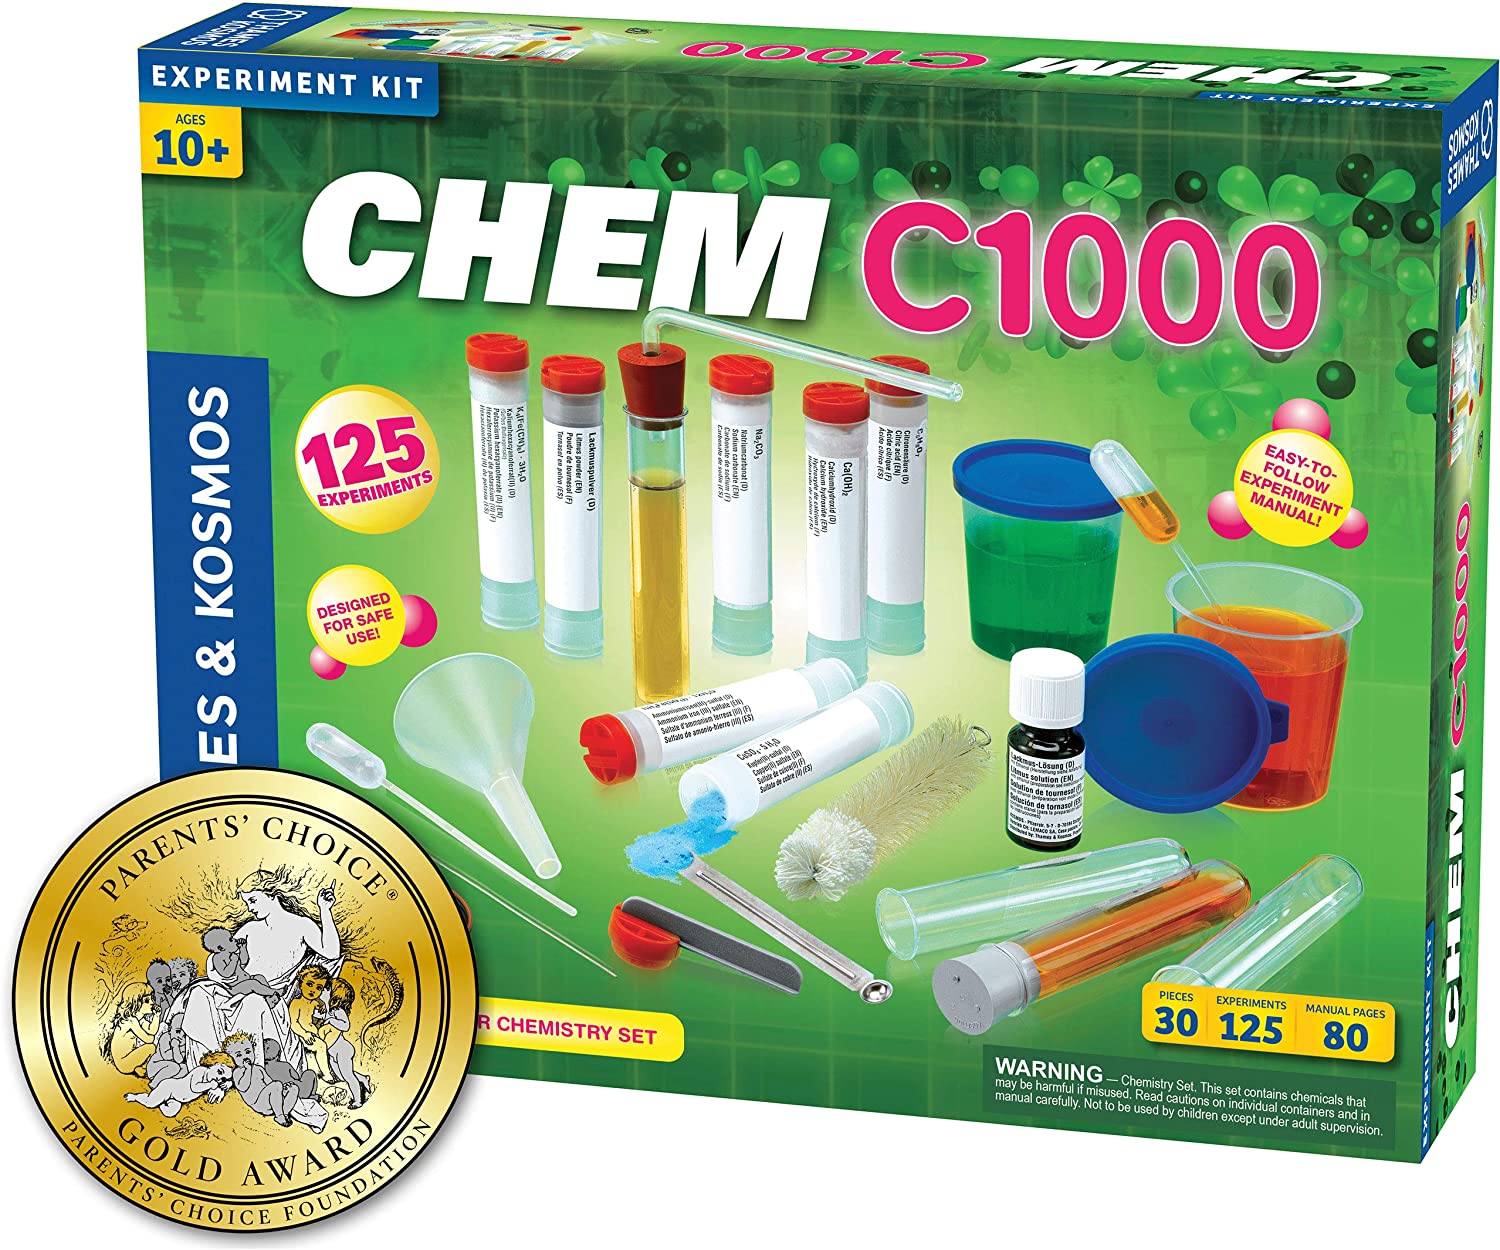 Thames & Kosmos Chem C1000 (V 2.0) Chemistry Set with 125 Experiments & 80 Page Lab Manual, Student Laboratory Quality Instruments & Chemicals